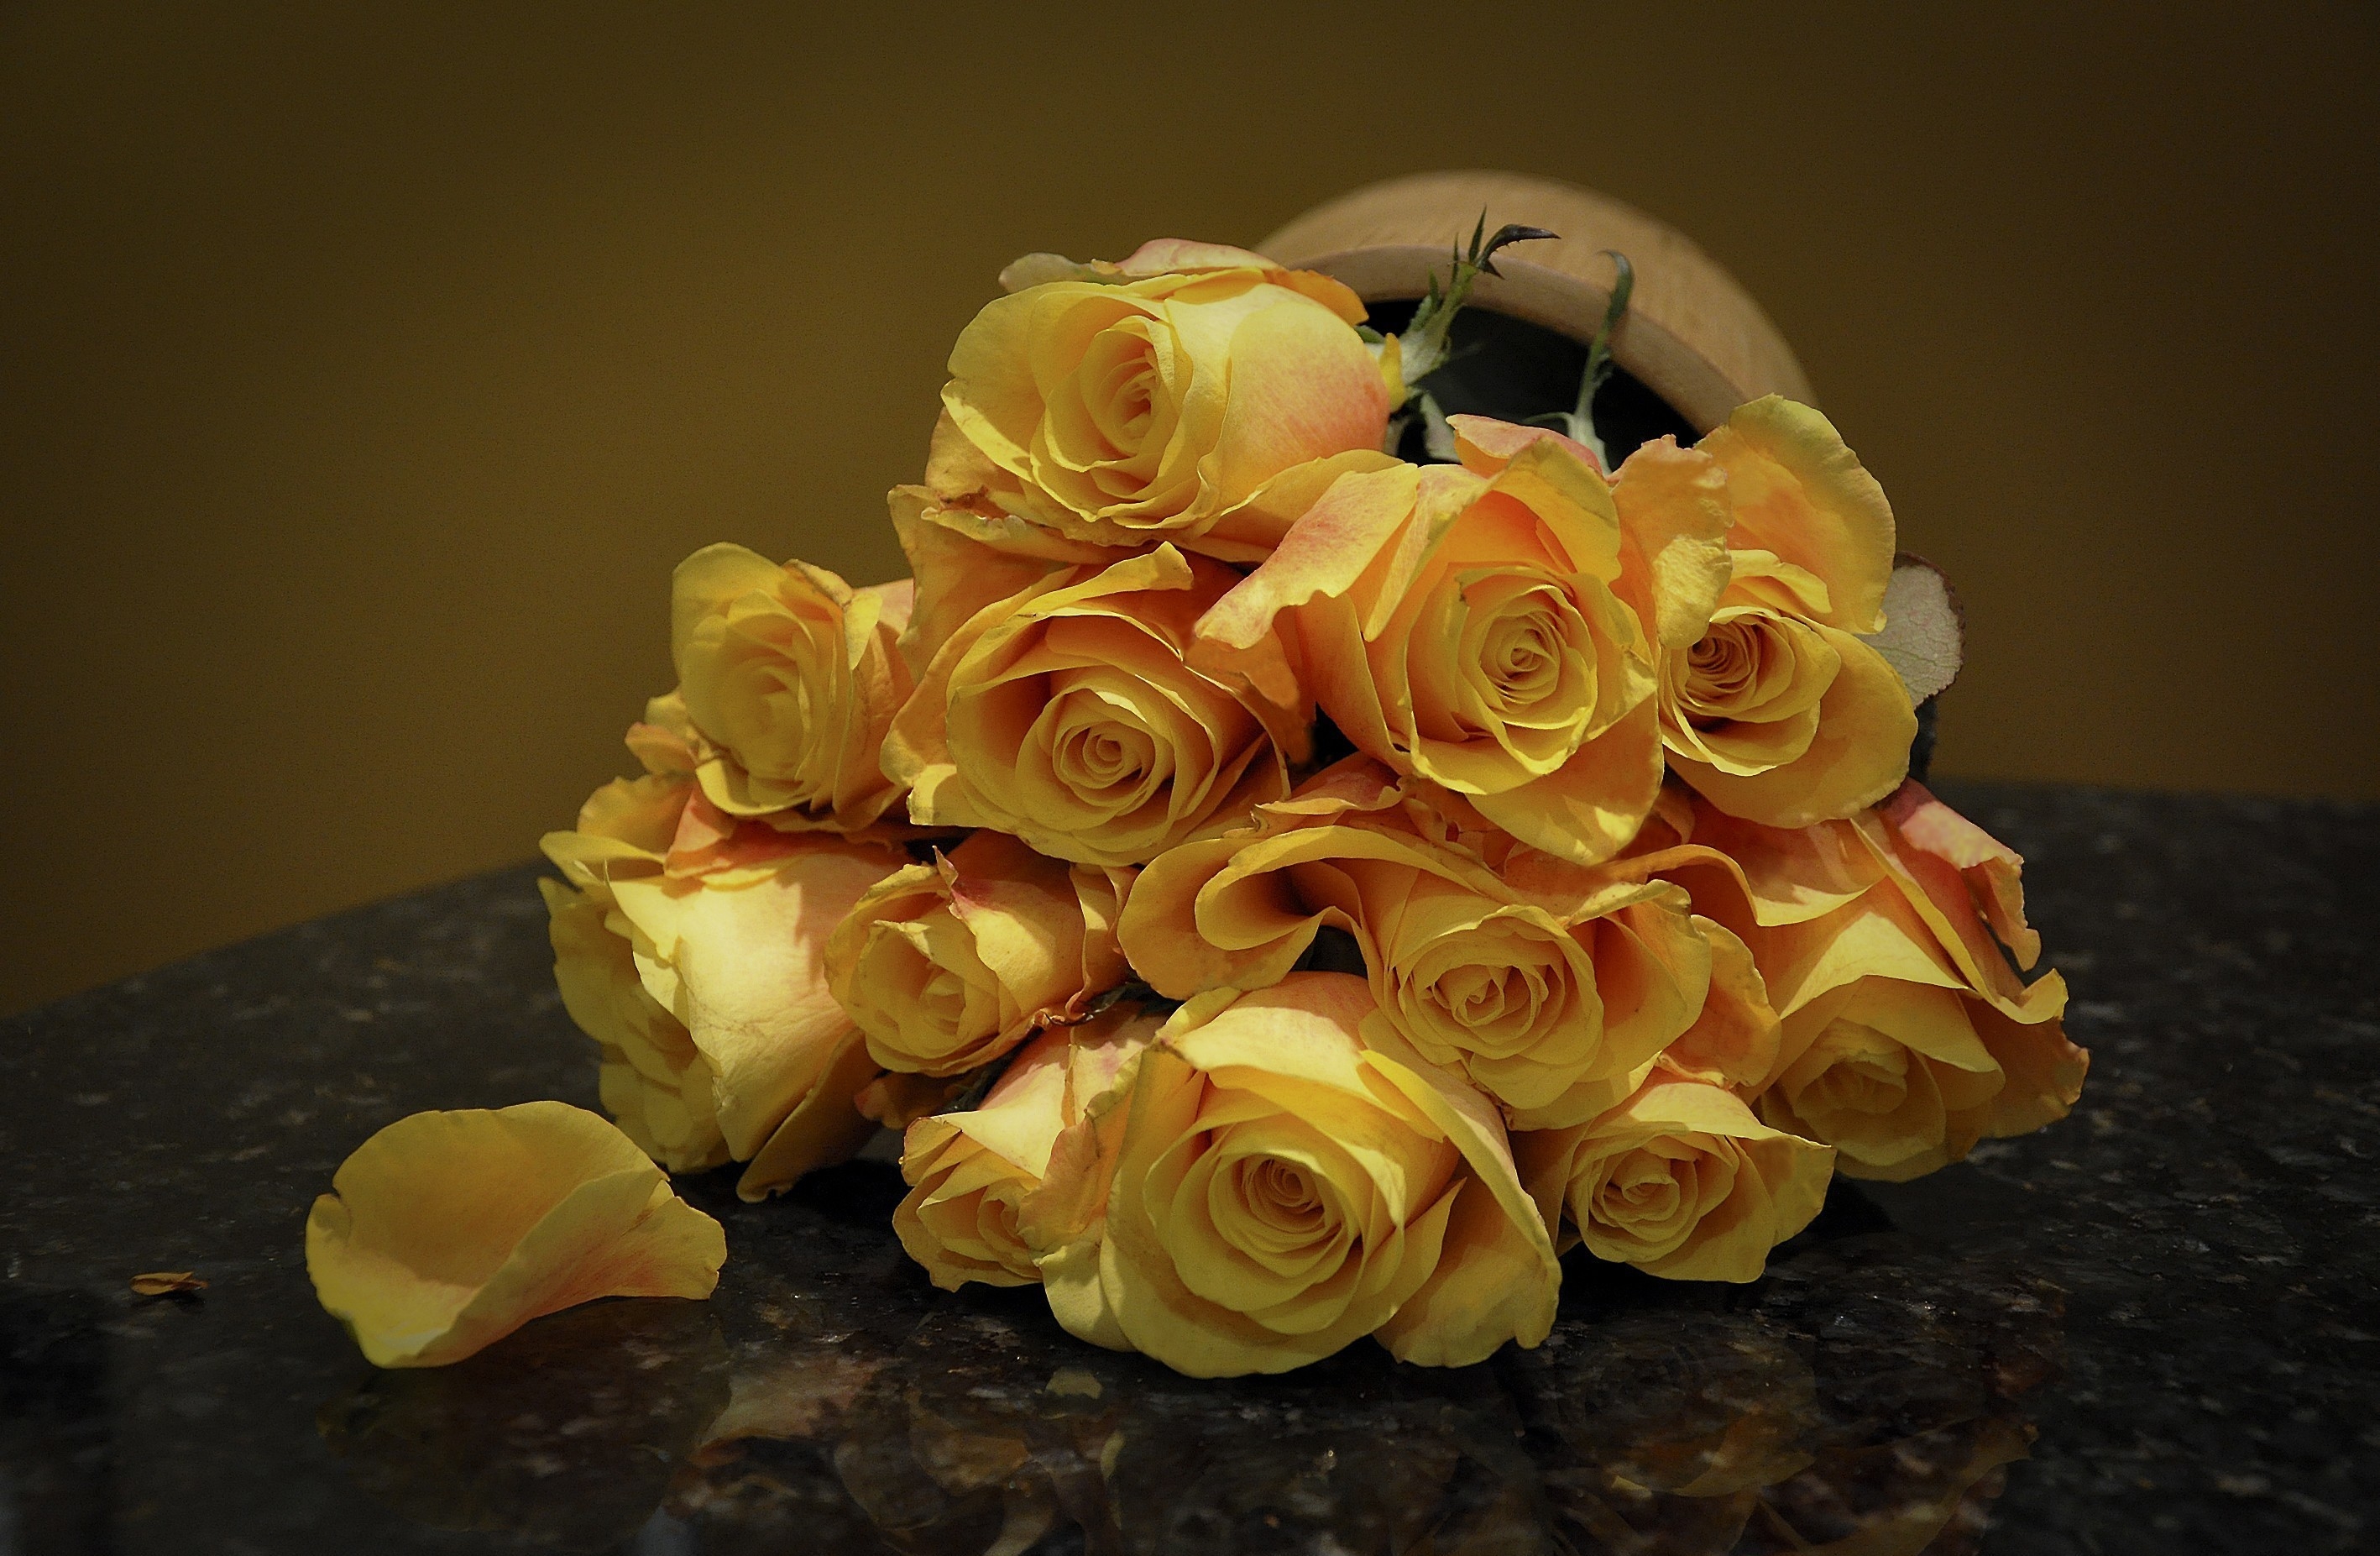 bouquet, yellow, flowers, roses, spotted, spotty High Definition image